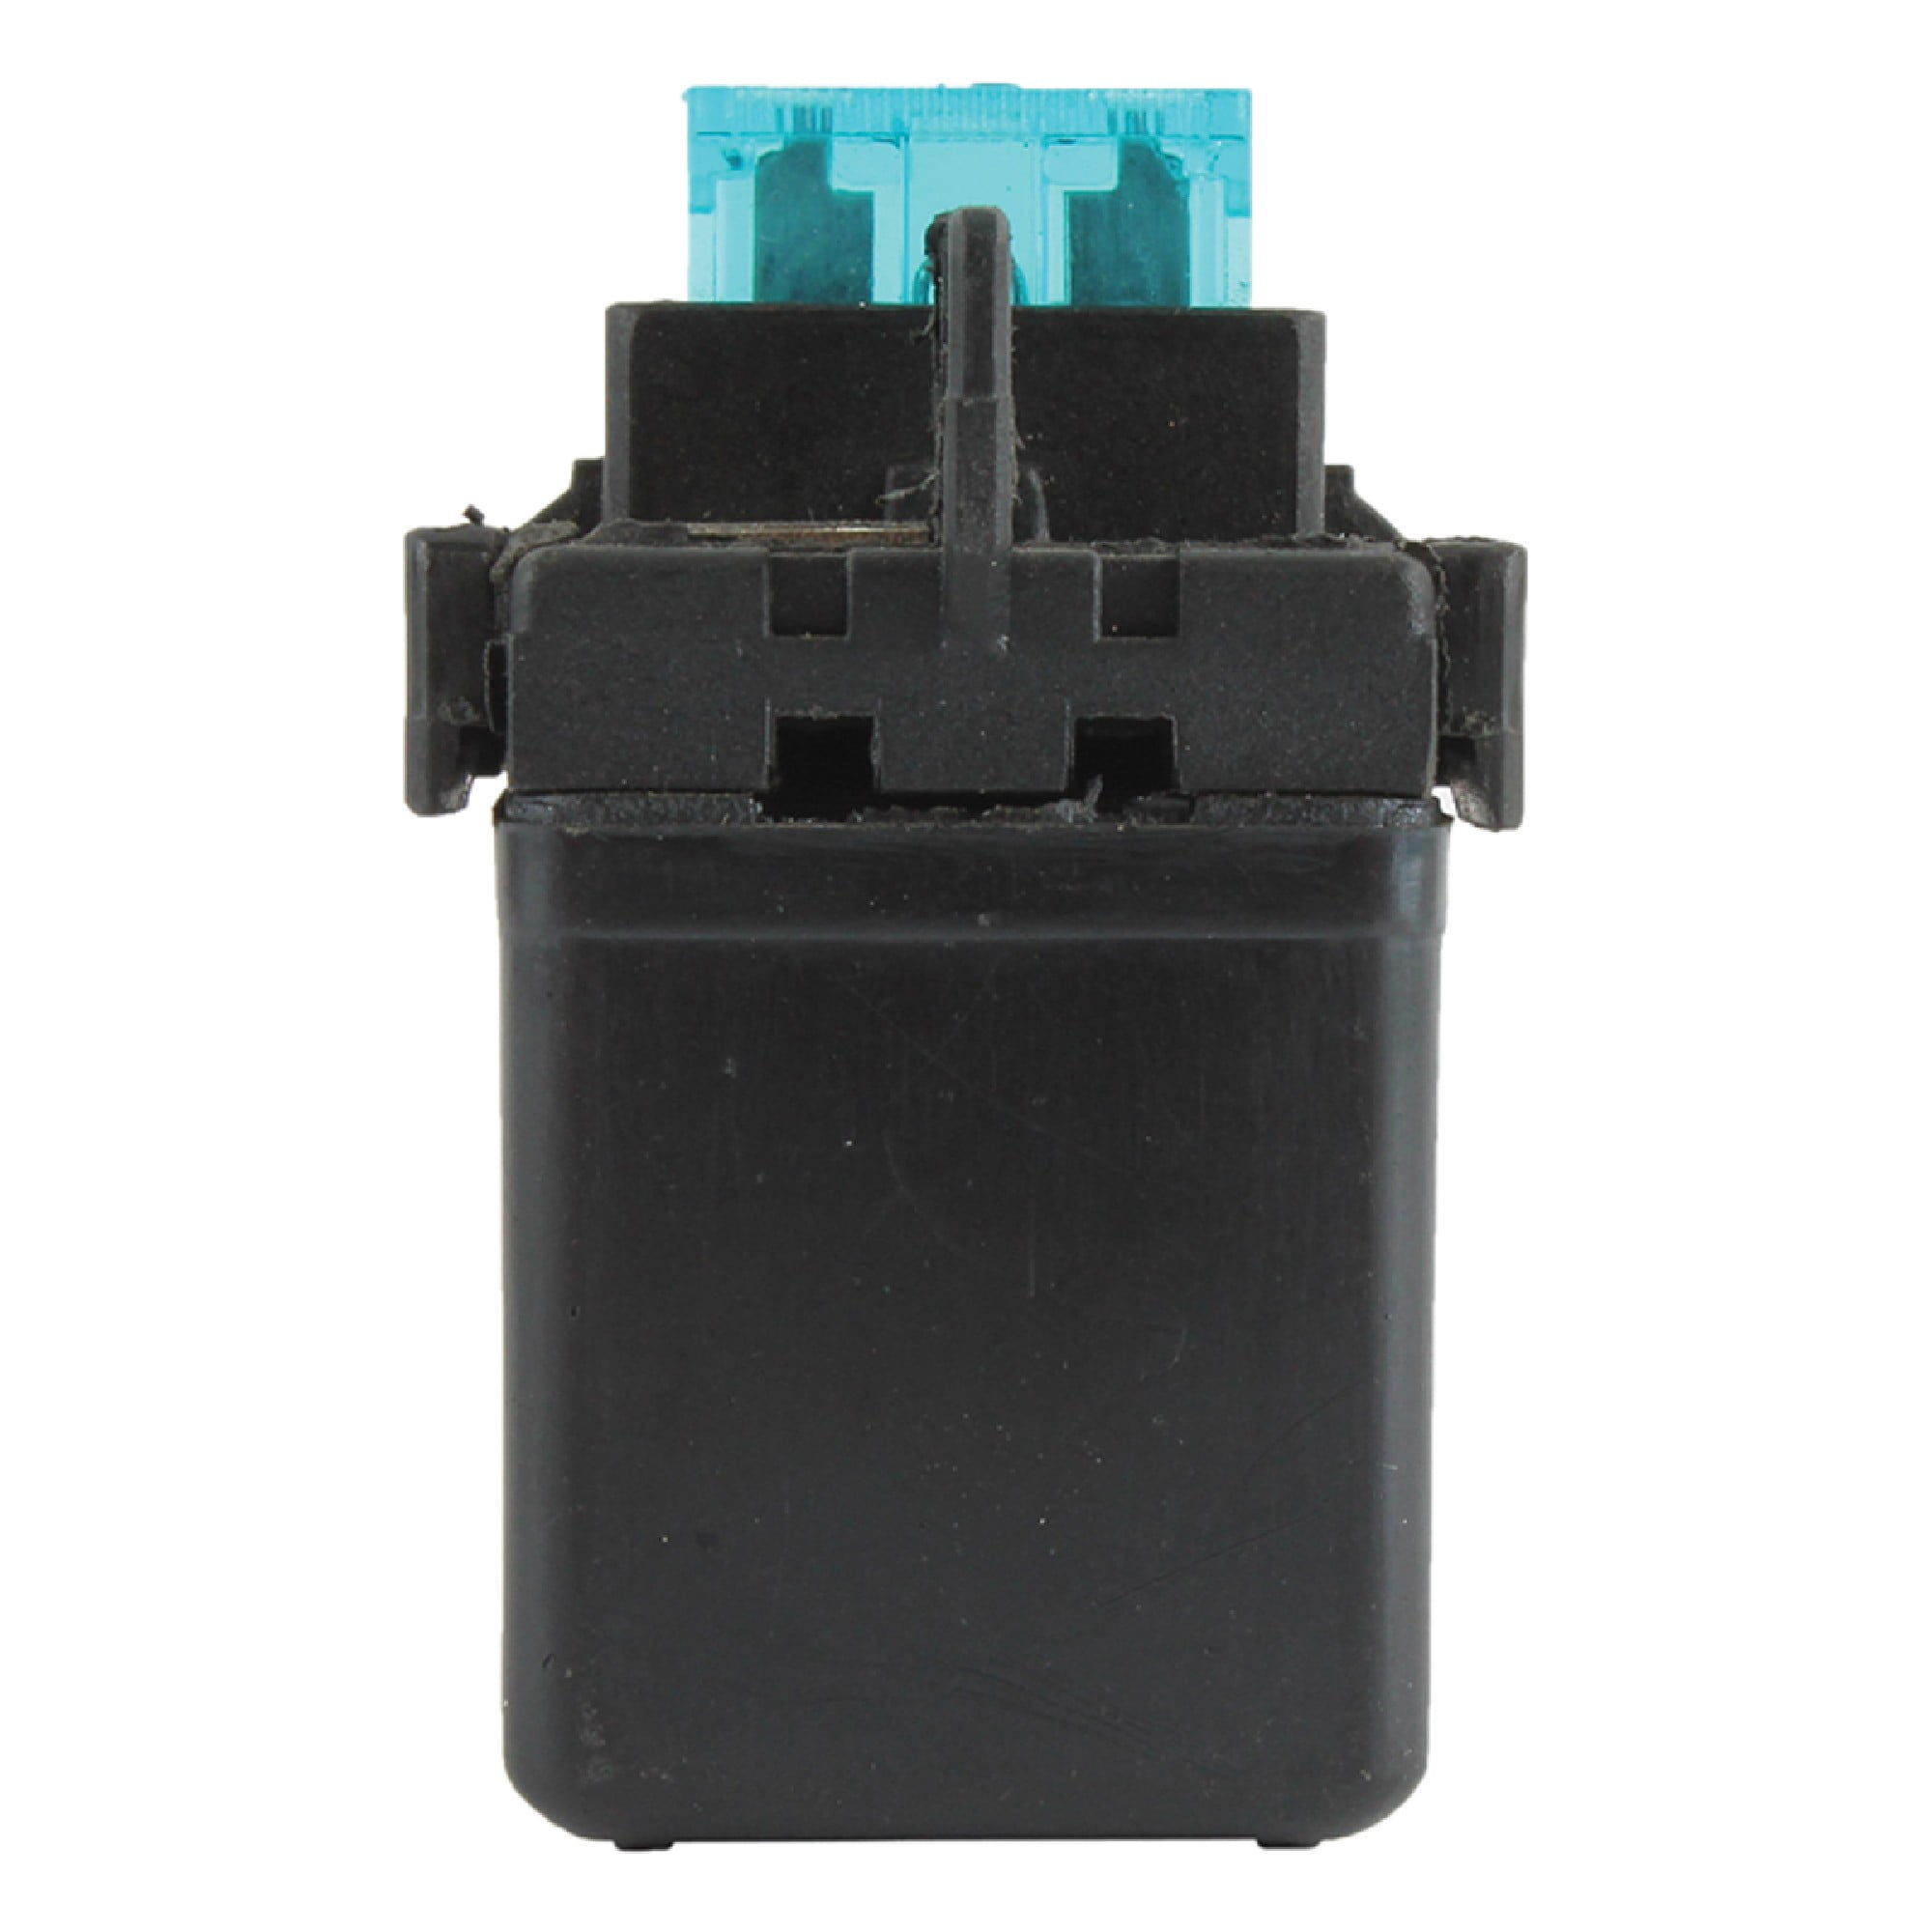 New DB Electrical 240-54080 Starter Relay Compatible With/Replacement For Honda CRF250X 2004-2017 35850-KK6-740 